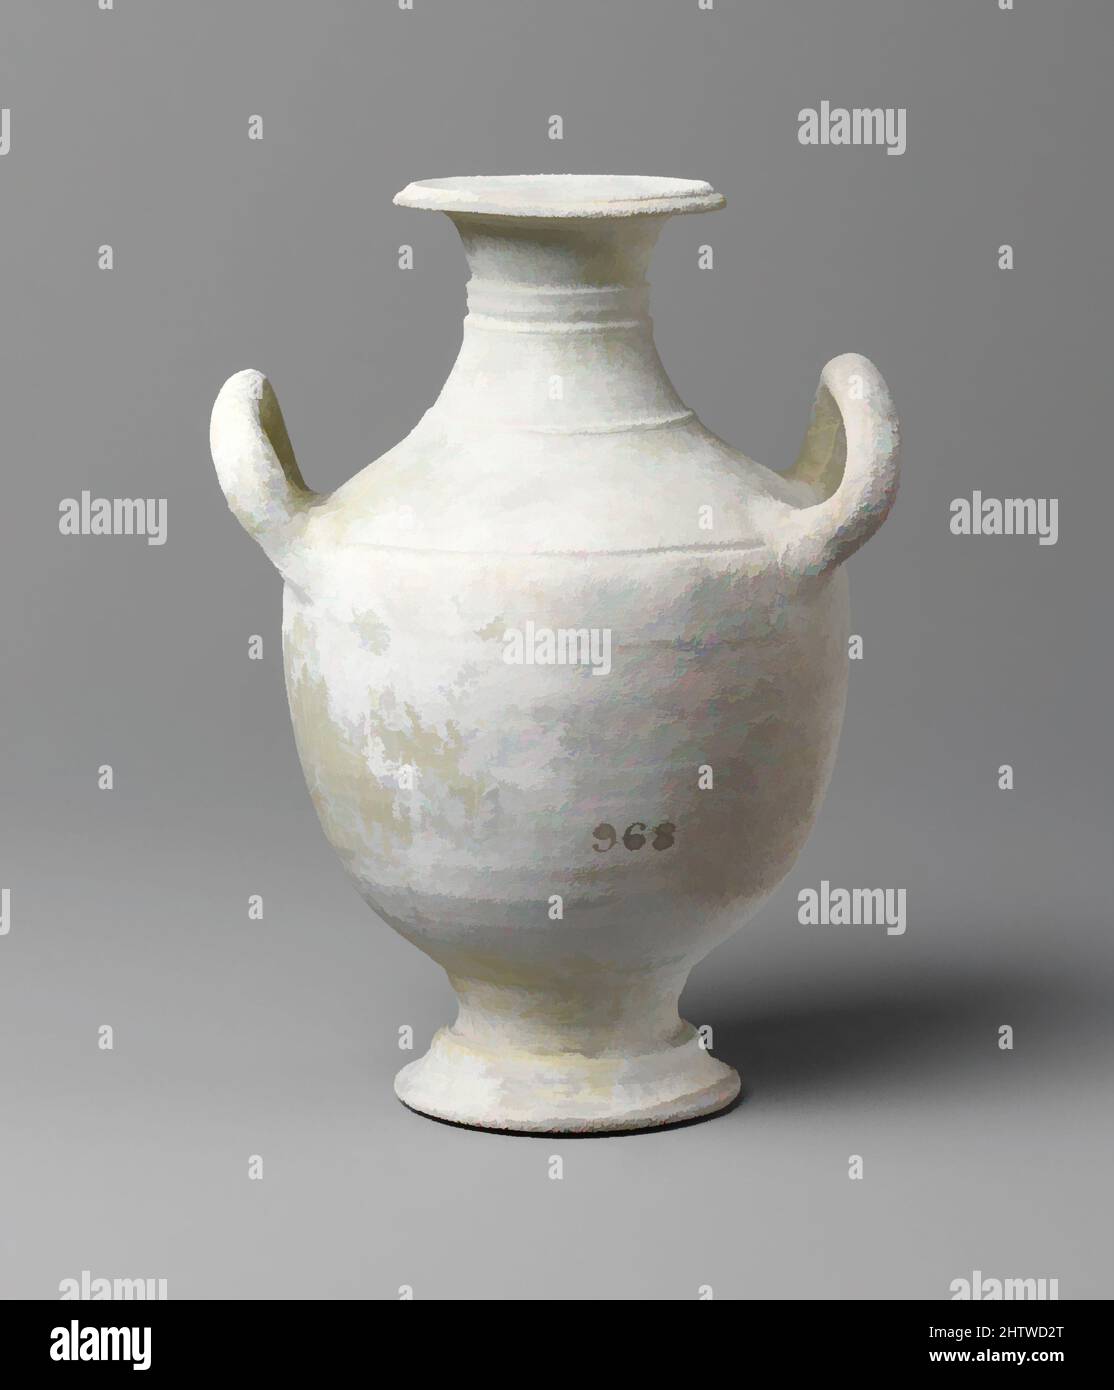 Art inspired by Terracotta amphora, Hellenistic, late 4th century B.C., Greek, Cypriot, Terracotta, h. 6 3/16 in. (15.7 cm), Vases, This diminutive amphora is in the 'unpainted white ware' style, a descriptive term that calls attention to the plain light colored ground that lacks, Classic works modernized by Artotop with a splash of modernity. Shapes, color and value, eye-catching visual impact on art. Emotions through freedom of artworks in a contemporary way. A timeless message pursuing a wildly creative new direction. Artists turning to the digital medium and creating the Artotop NFT Stock Photo